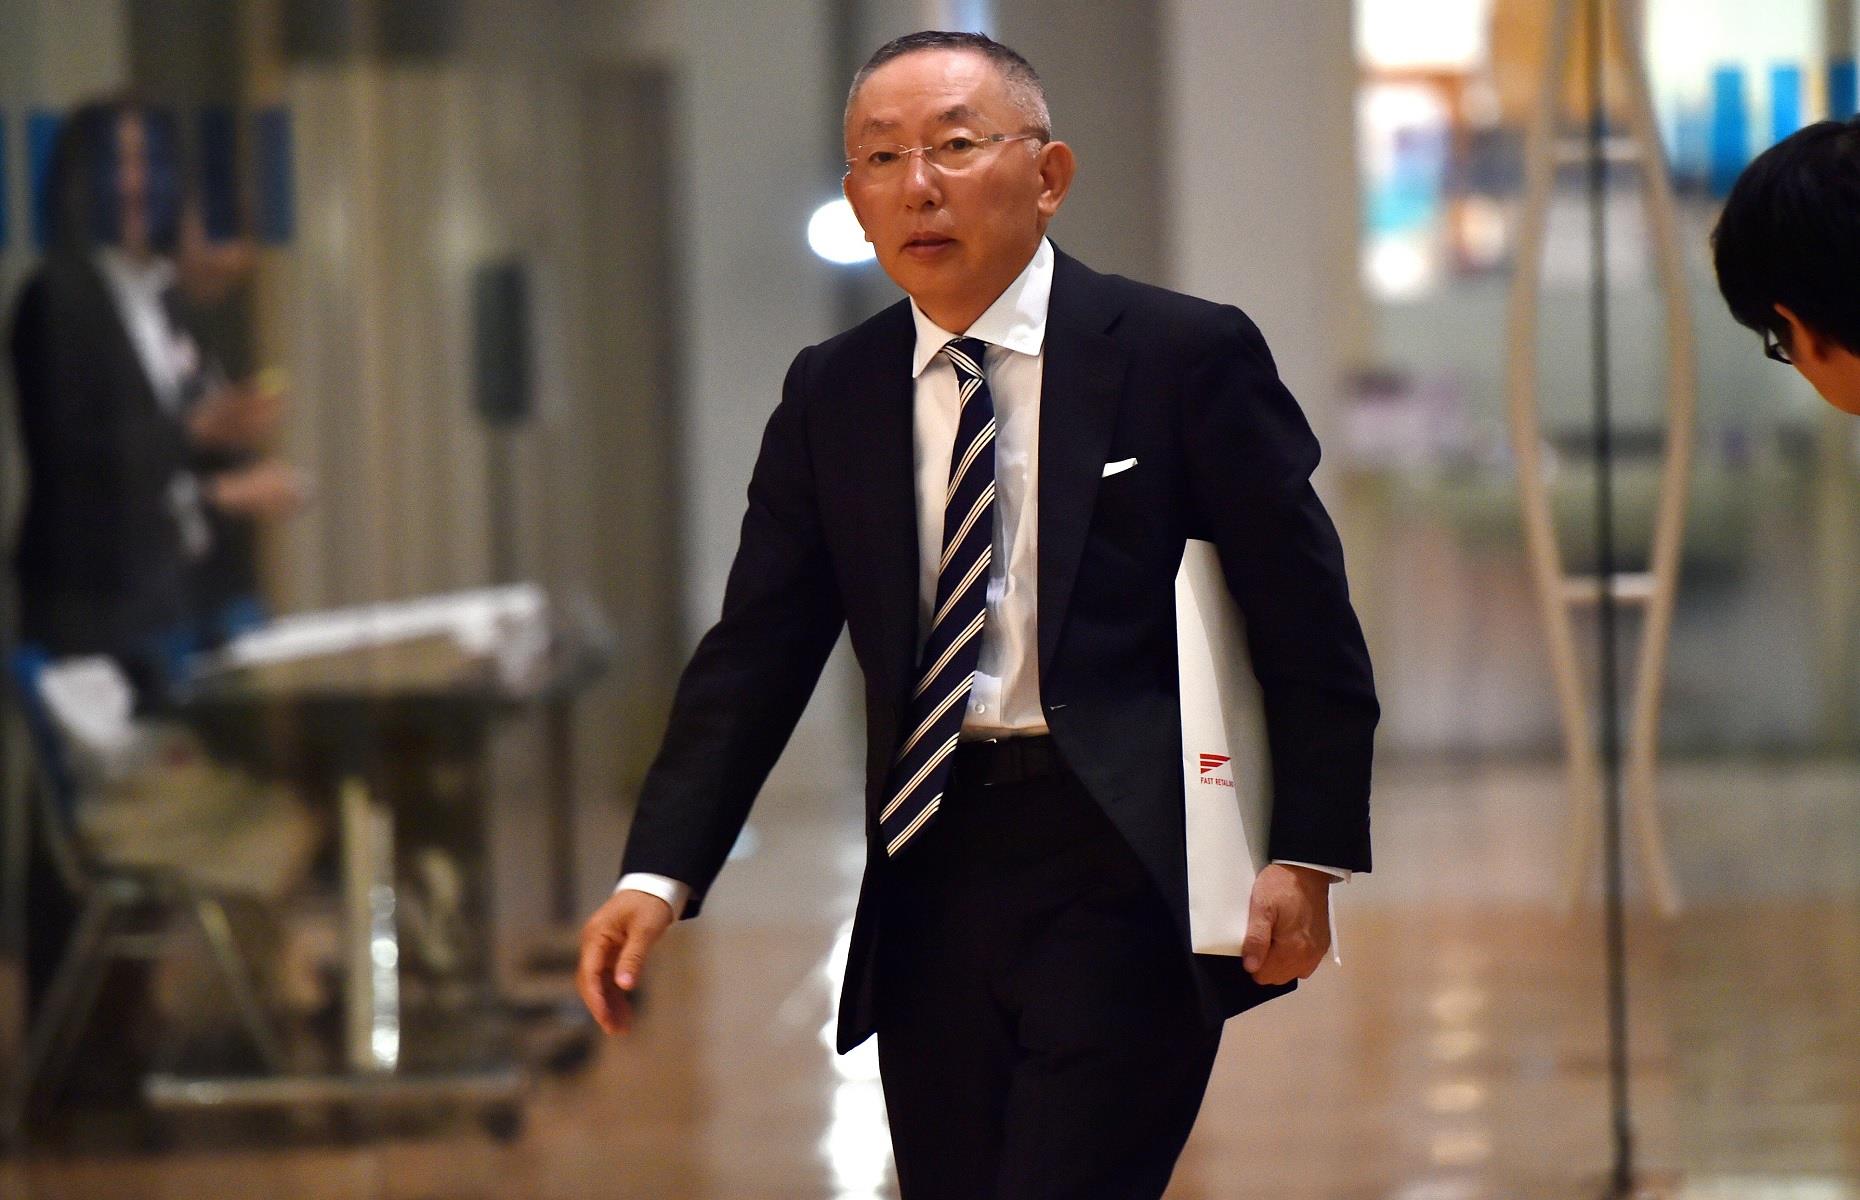 <p>Tadashi Yanai is the businessman behind Japanese fashion giant Fast Retailing, which is the parent company of brands including Uniqlo, Helmut Lang, and GU. As its flagship company, Uniqlo currently has around 2,400 locations in 25 countries, contributing to Fast Retailing's profits of $1.2 billion in the financial year ending August 2022. </p>  <p>Yanai, who has aspirations for Fast Retailing to become the largest retailer in the world, is married with two sons. He reportedly lives in a 16,586-square-foot mansion just outside Tokyo and owns two golf courses in Hawaii.</p>